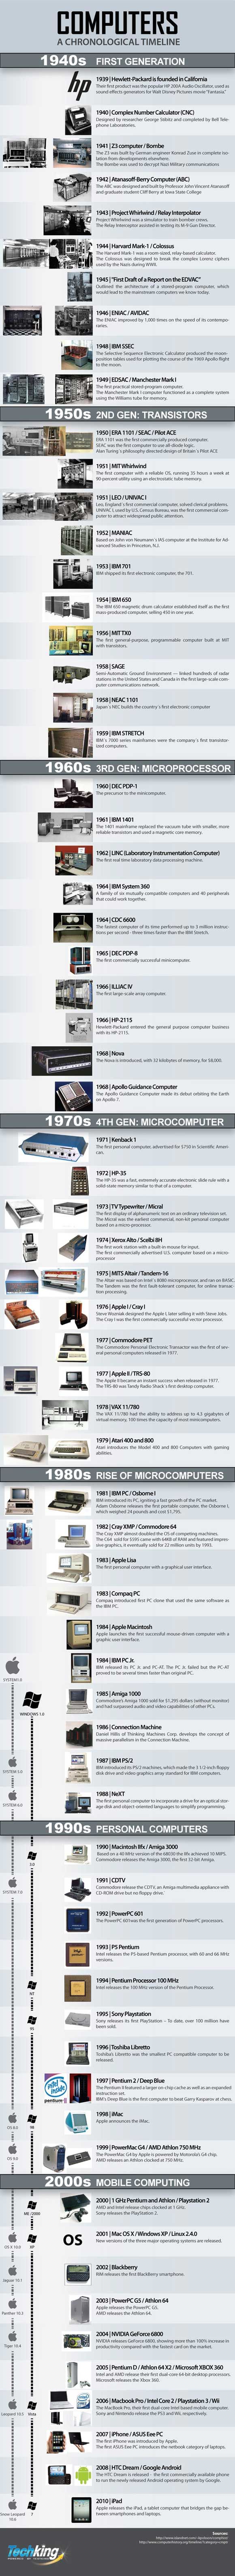 The History of Computers 1938 to 2010 [Infographic]